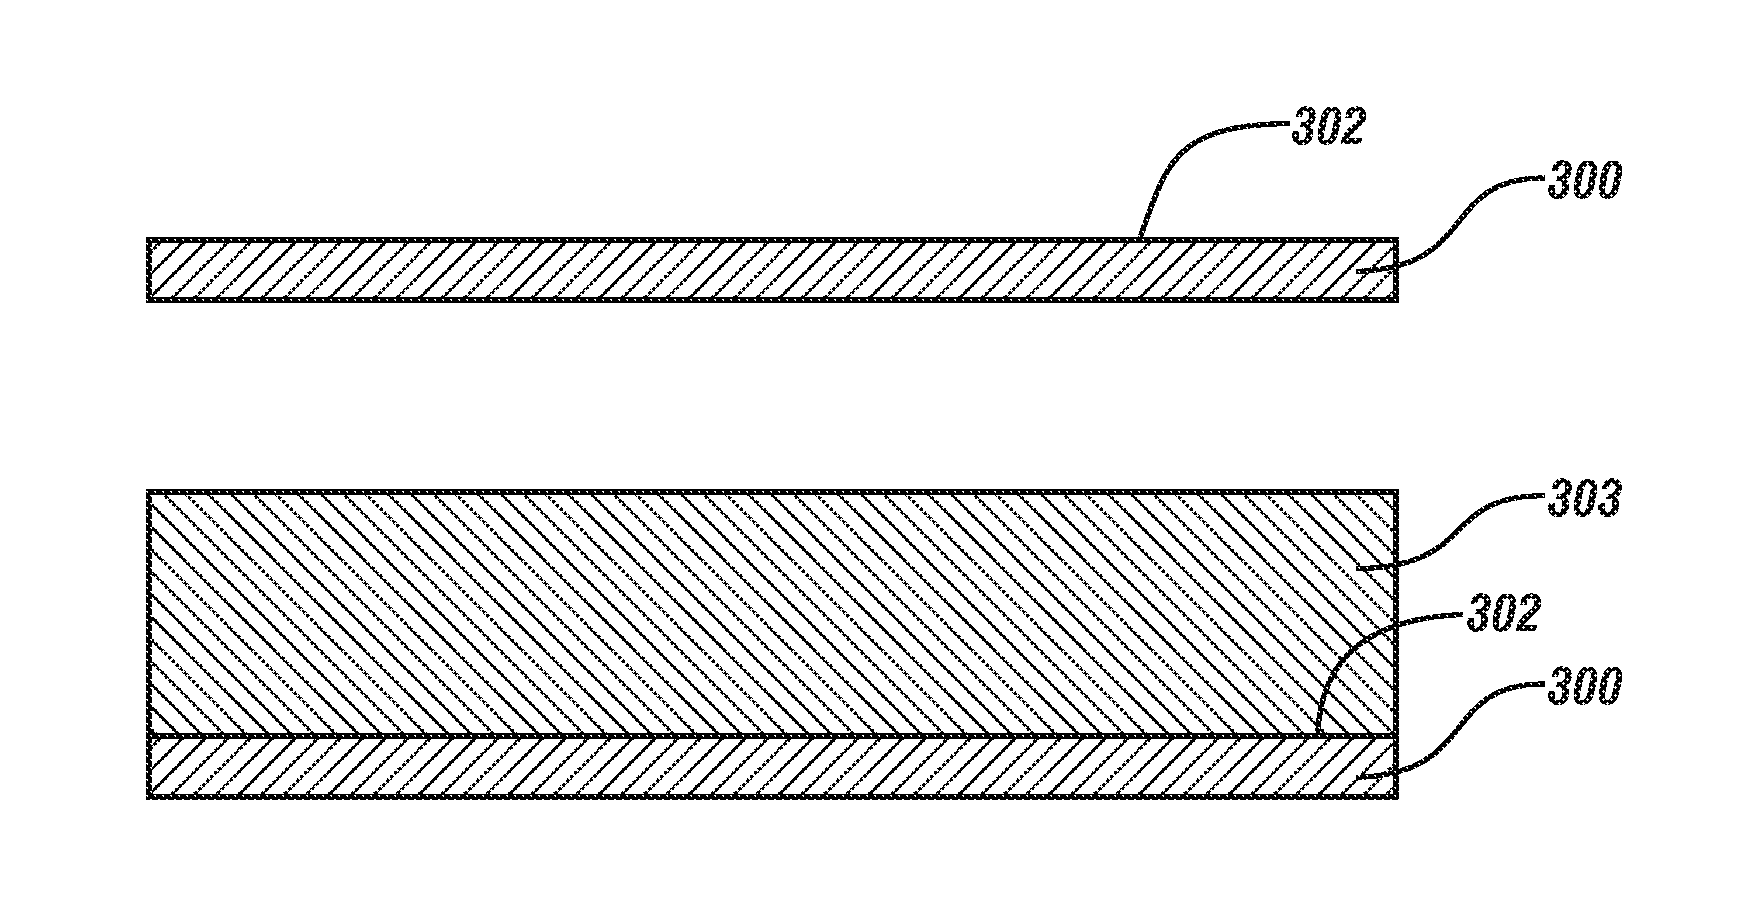 Lithium-ion battery electrodes with shape-memory-alloy current collecting substrates